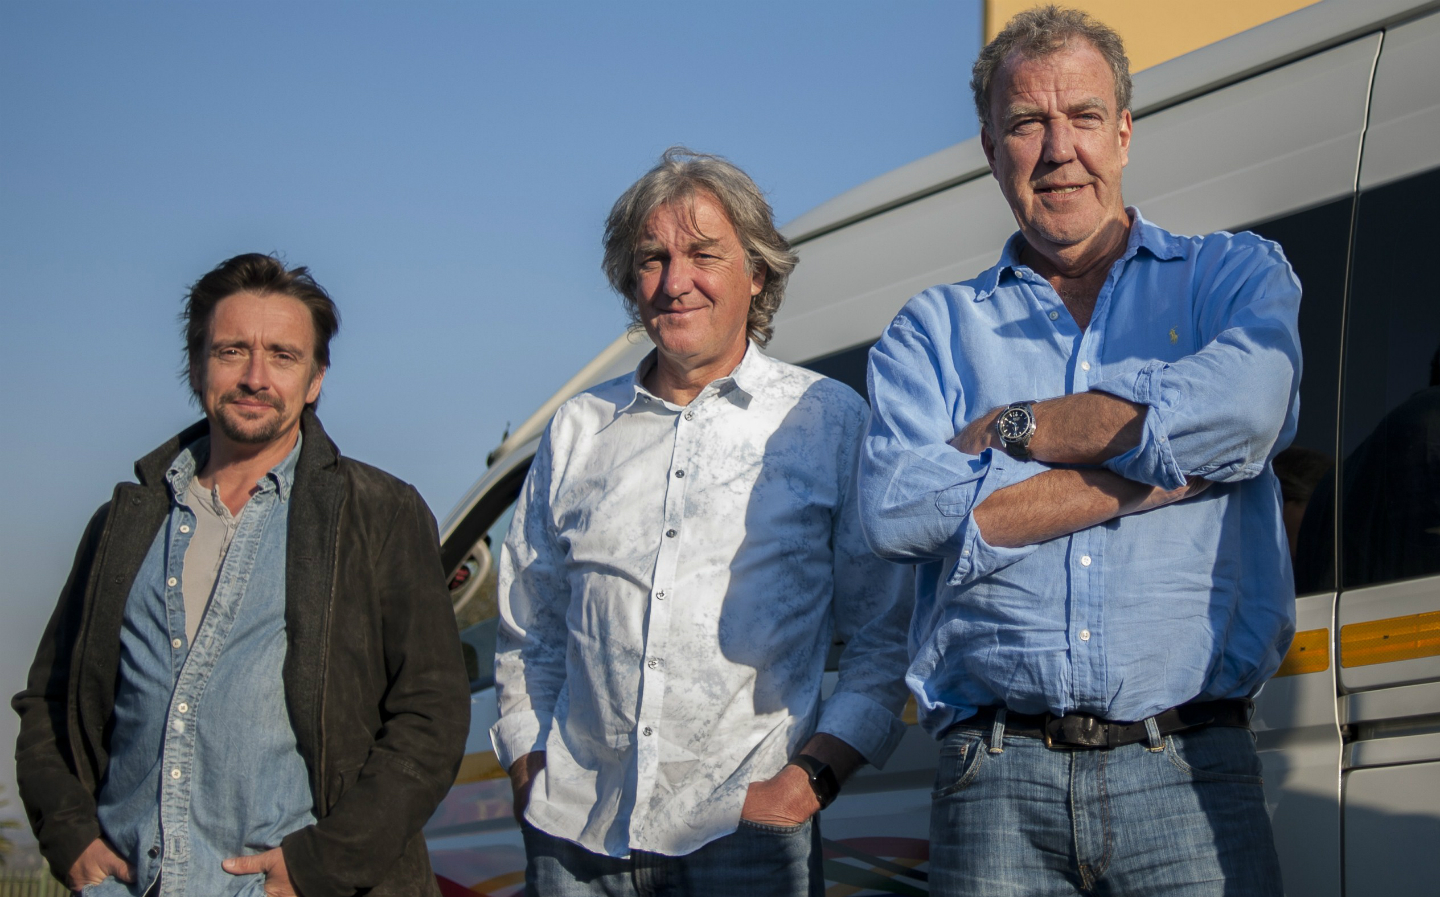 Jeremy Clarkson's, Richard Hammond's and James May's best Top Gear and Grand Tour moments